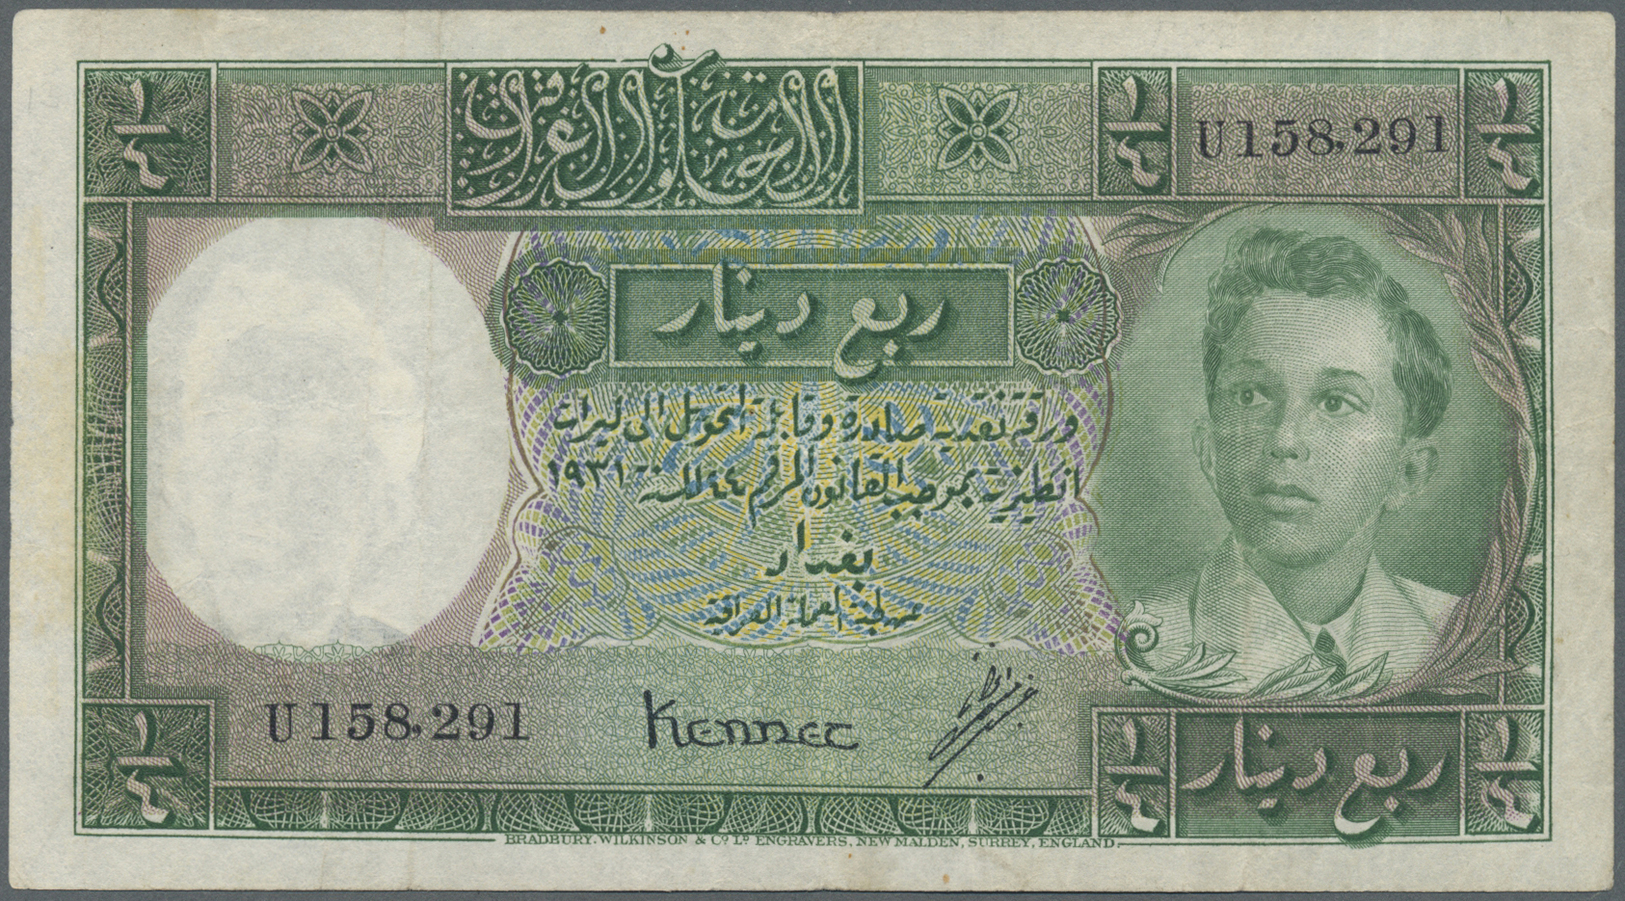 01220 Iraq / Irak: 1/4 Dinar 1931 P. 22, Used With Several Folds, No Holes Or Tears, Probably Pressed, Condition: F+. - Iraq